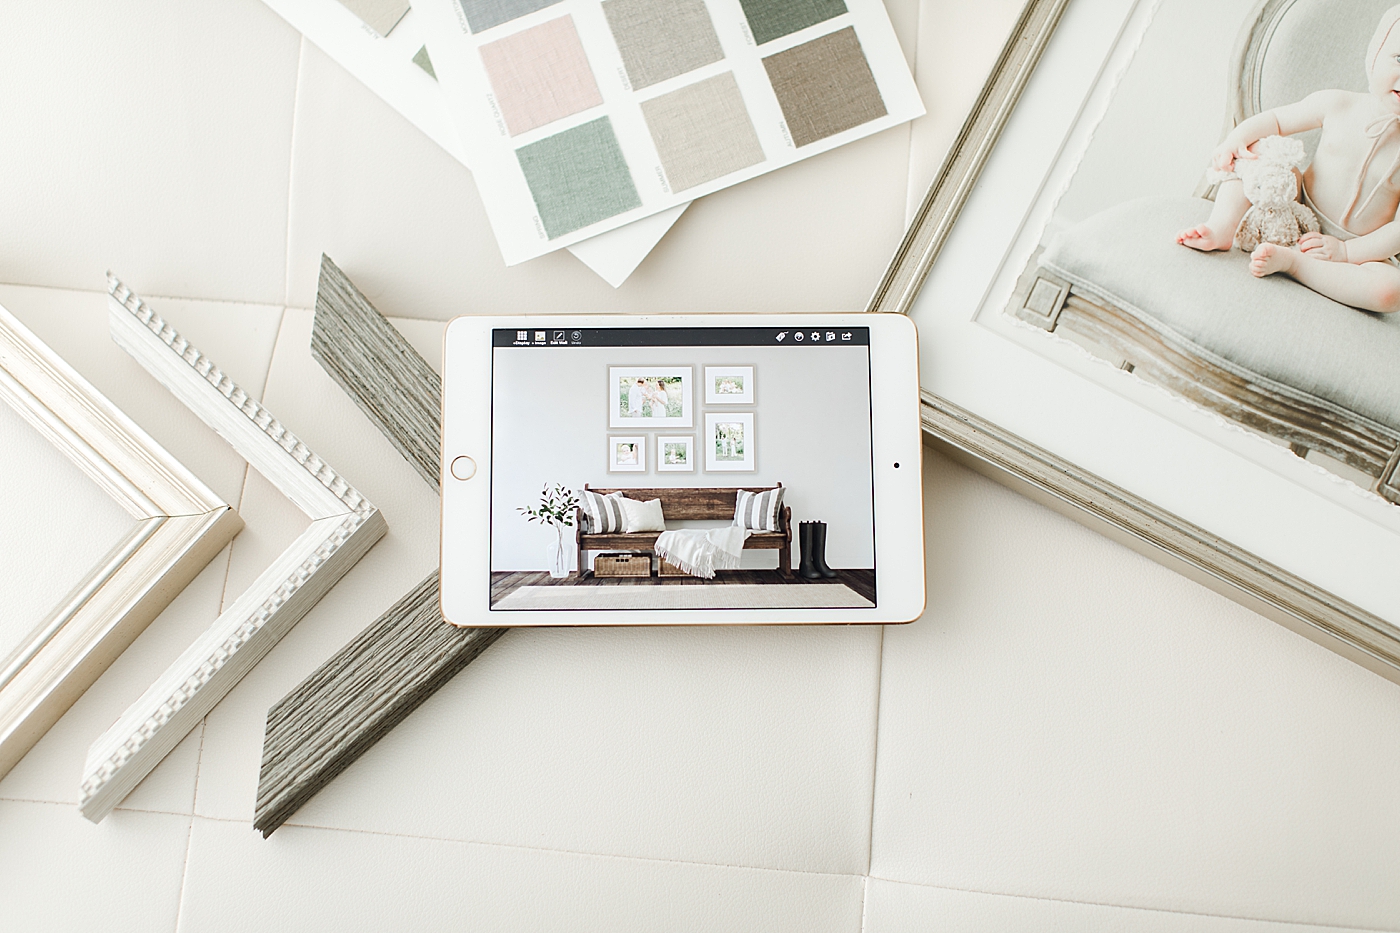 Custom framing software making it easy to design gallery walls for your home. This is part of the client experience with Rachel Brookes Photography.